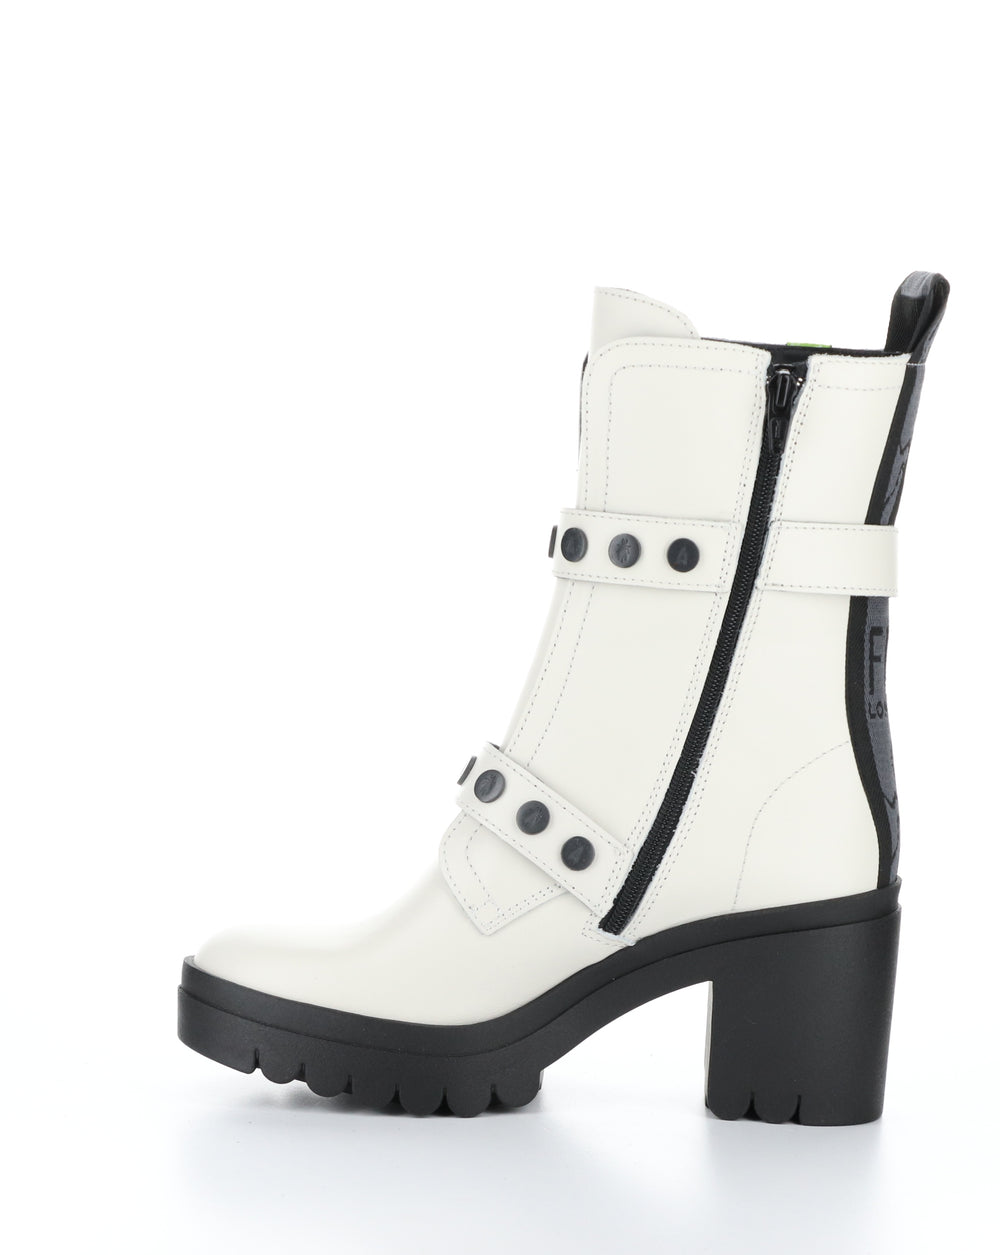 TAMA888FLY 001 OFF WHITE Round Toe Boots